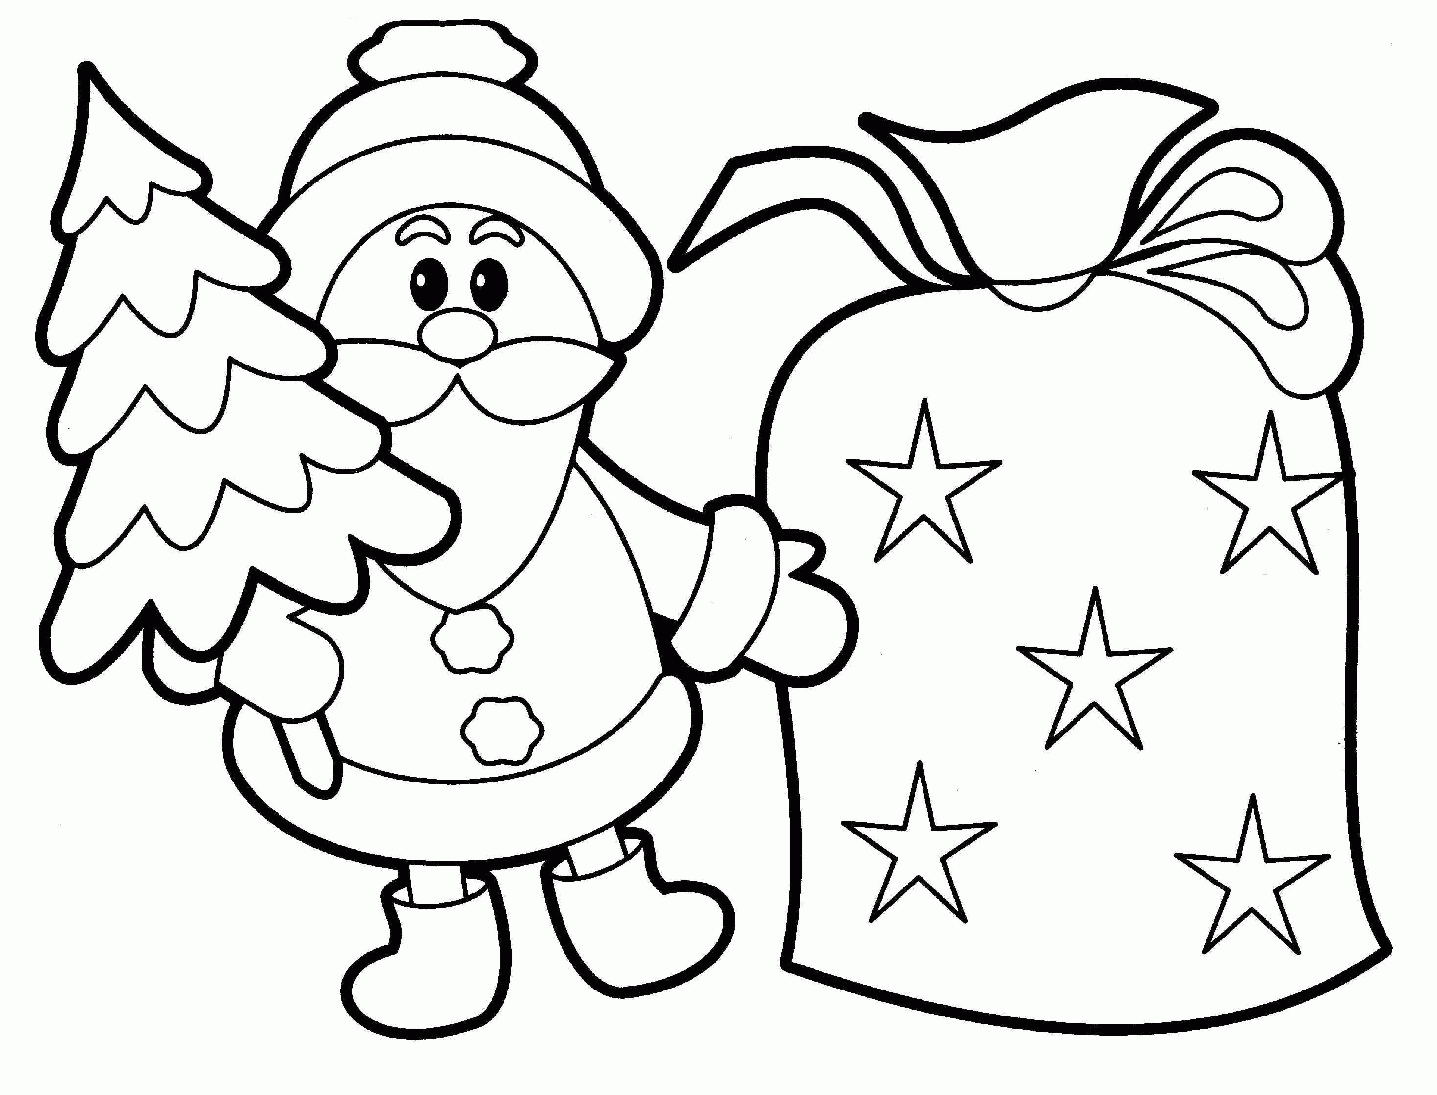 Big Coloring Pages Christmas - Coloring Pages For All Ages